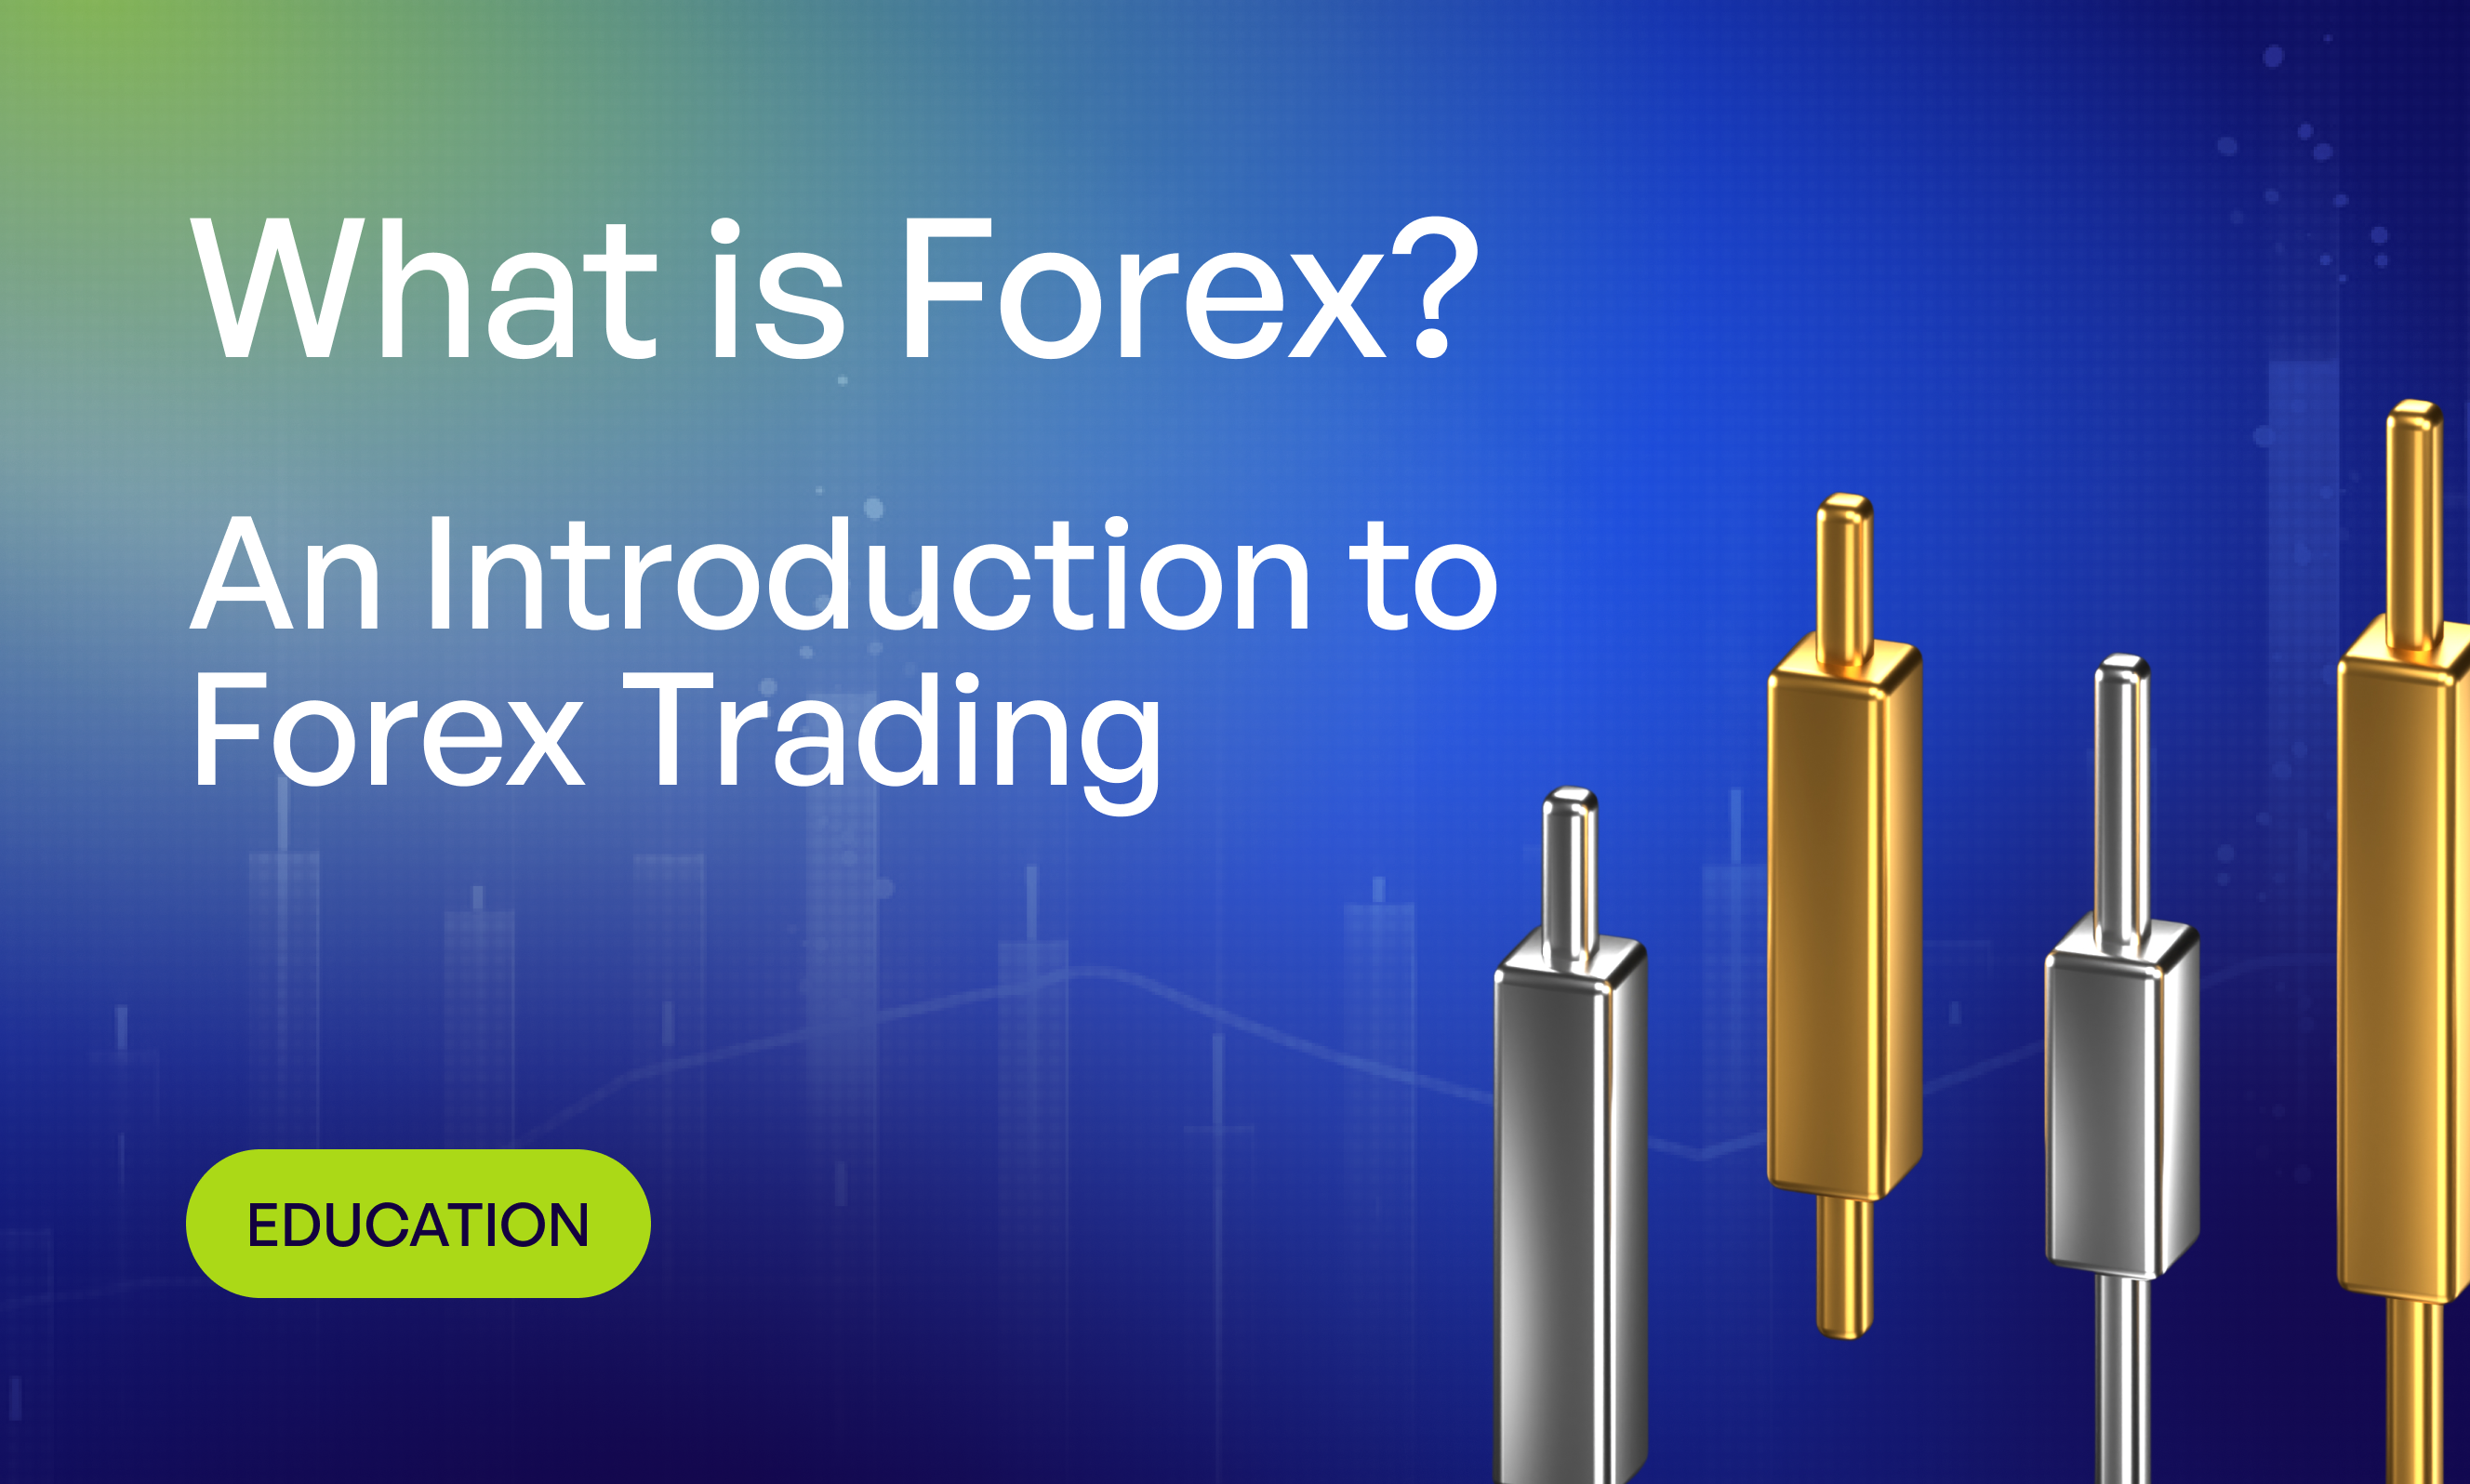 What Is Forex? An Introduction to Forex Trading